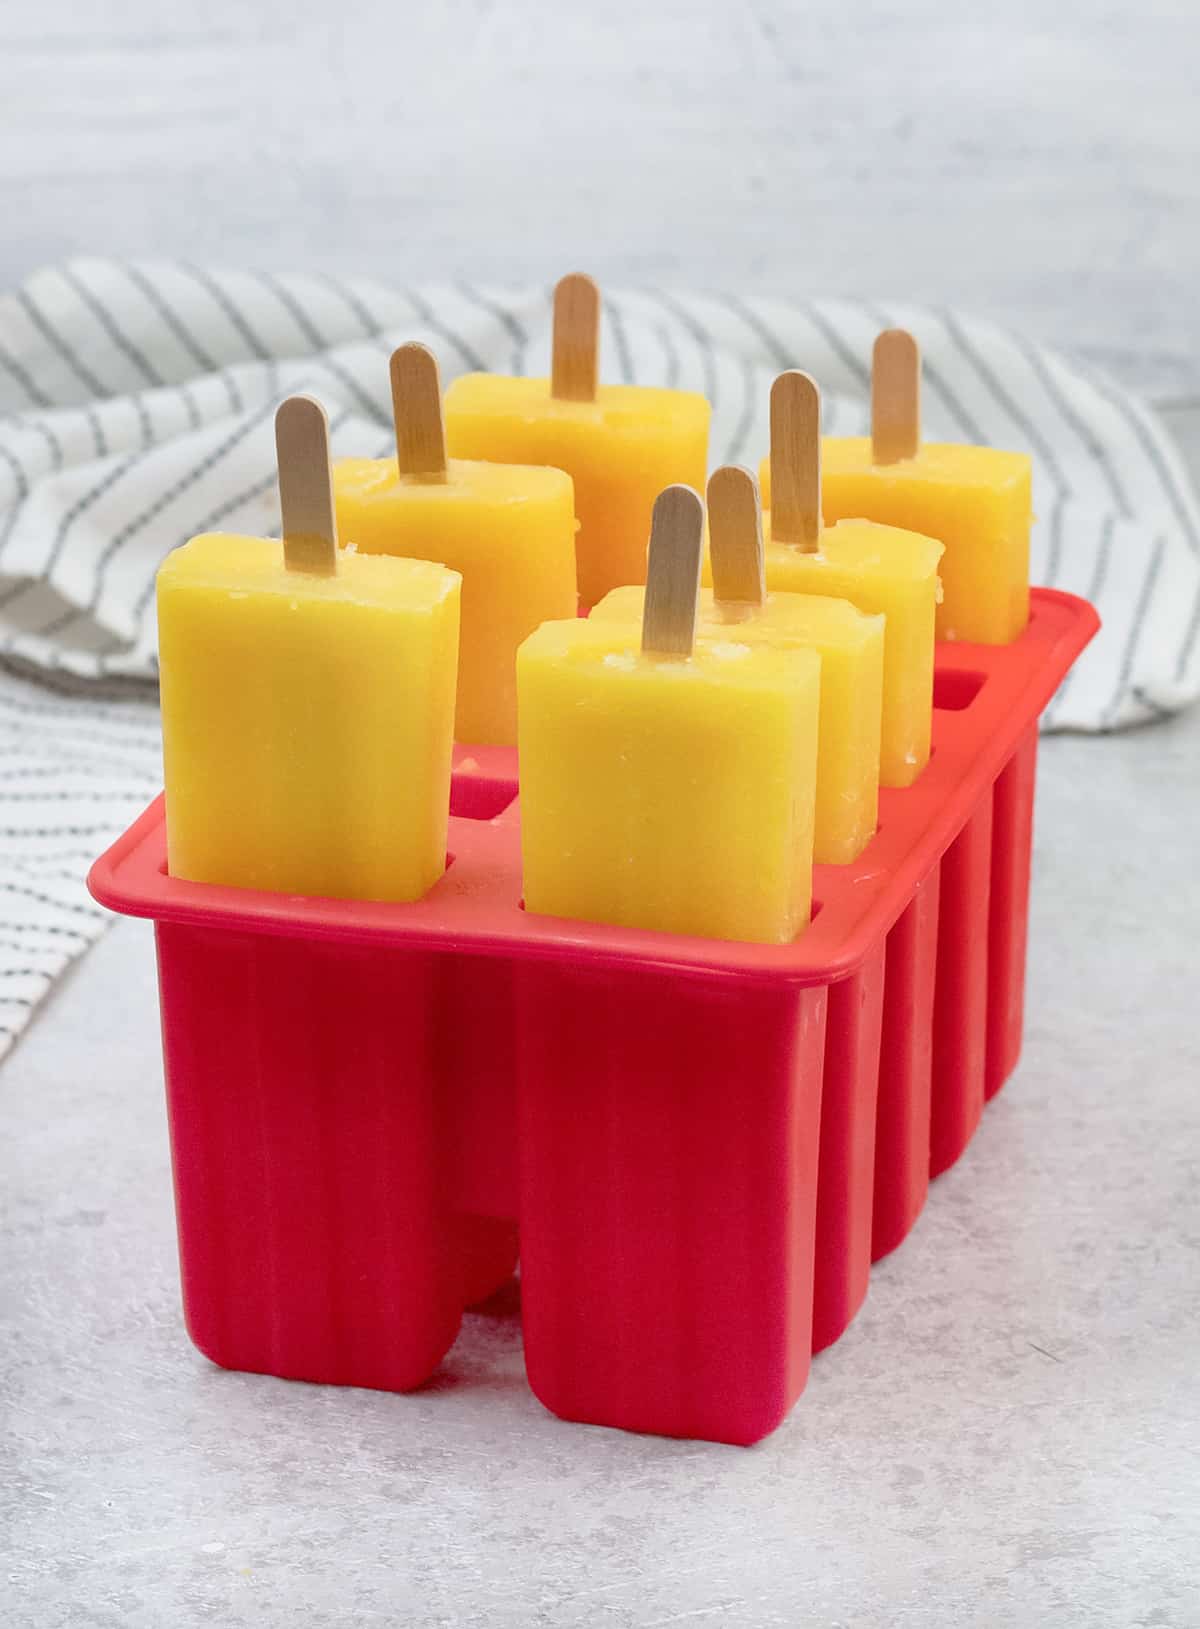 Mango Popsicles in popsicle molds.